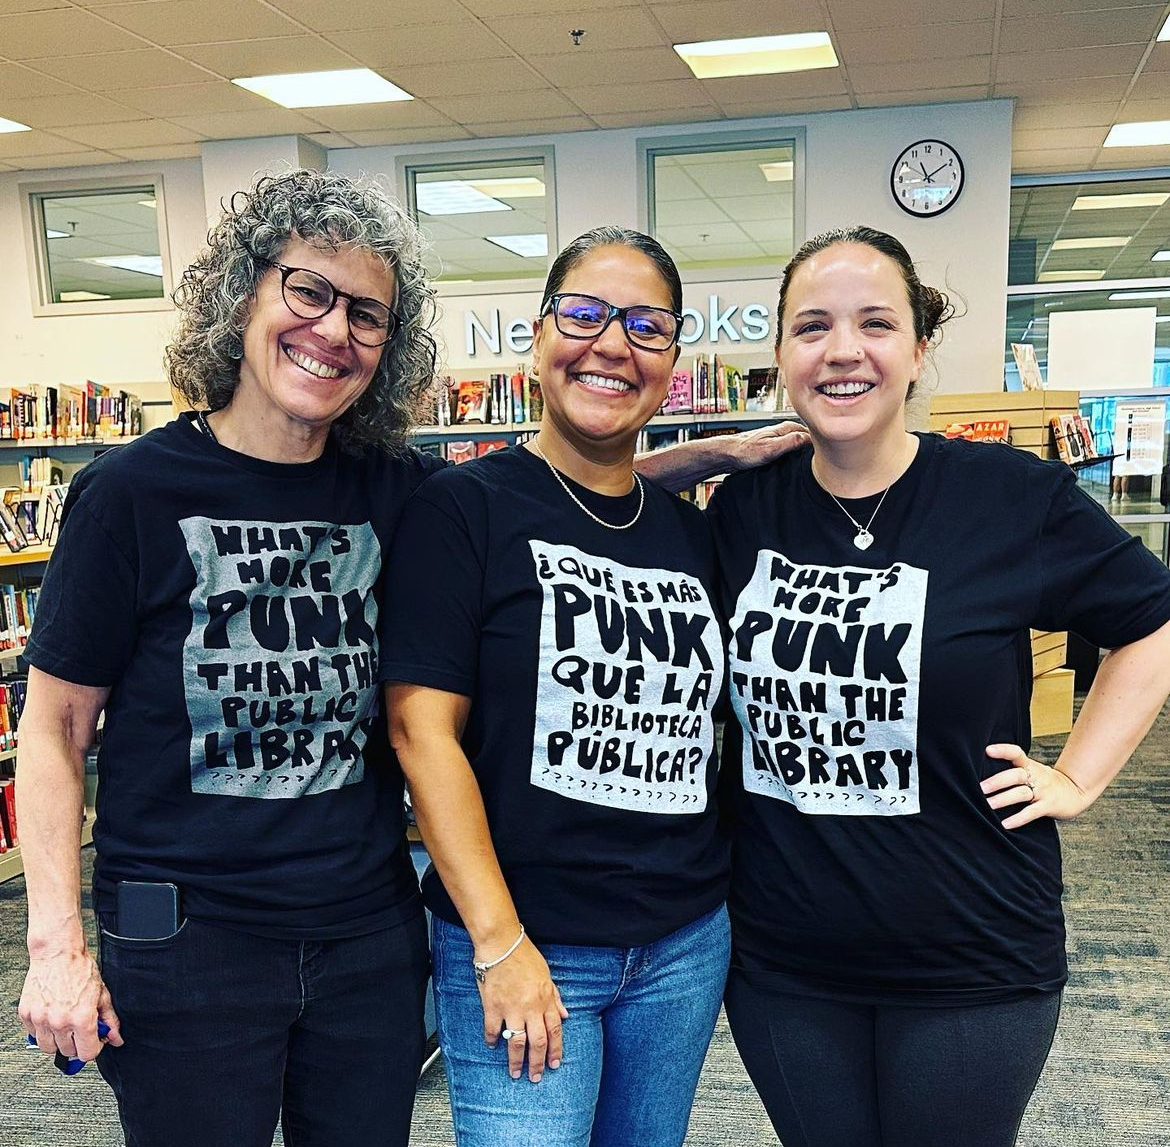 The+library+may+be+a+quiet+place%2C+but+the+librarians+make+a+loud+statement+with+their+edgy%2C+punk-inspired+shirts.+